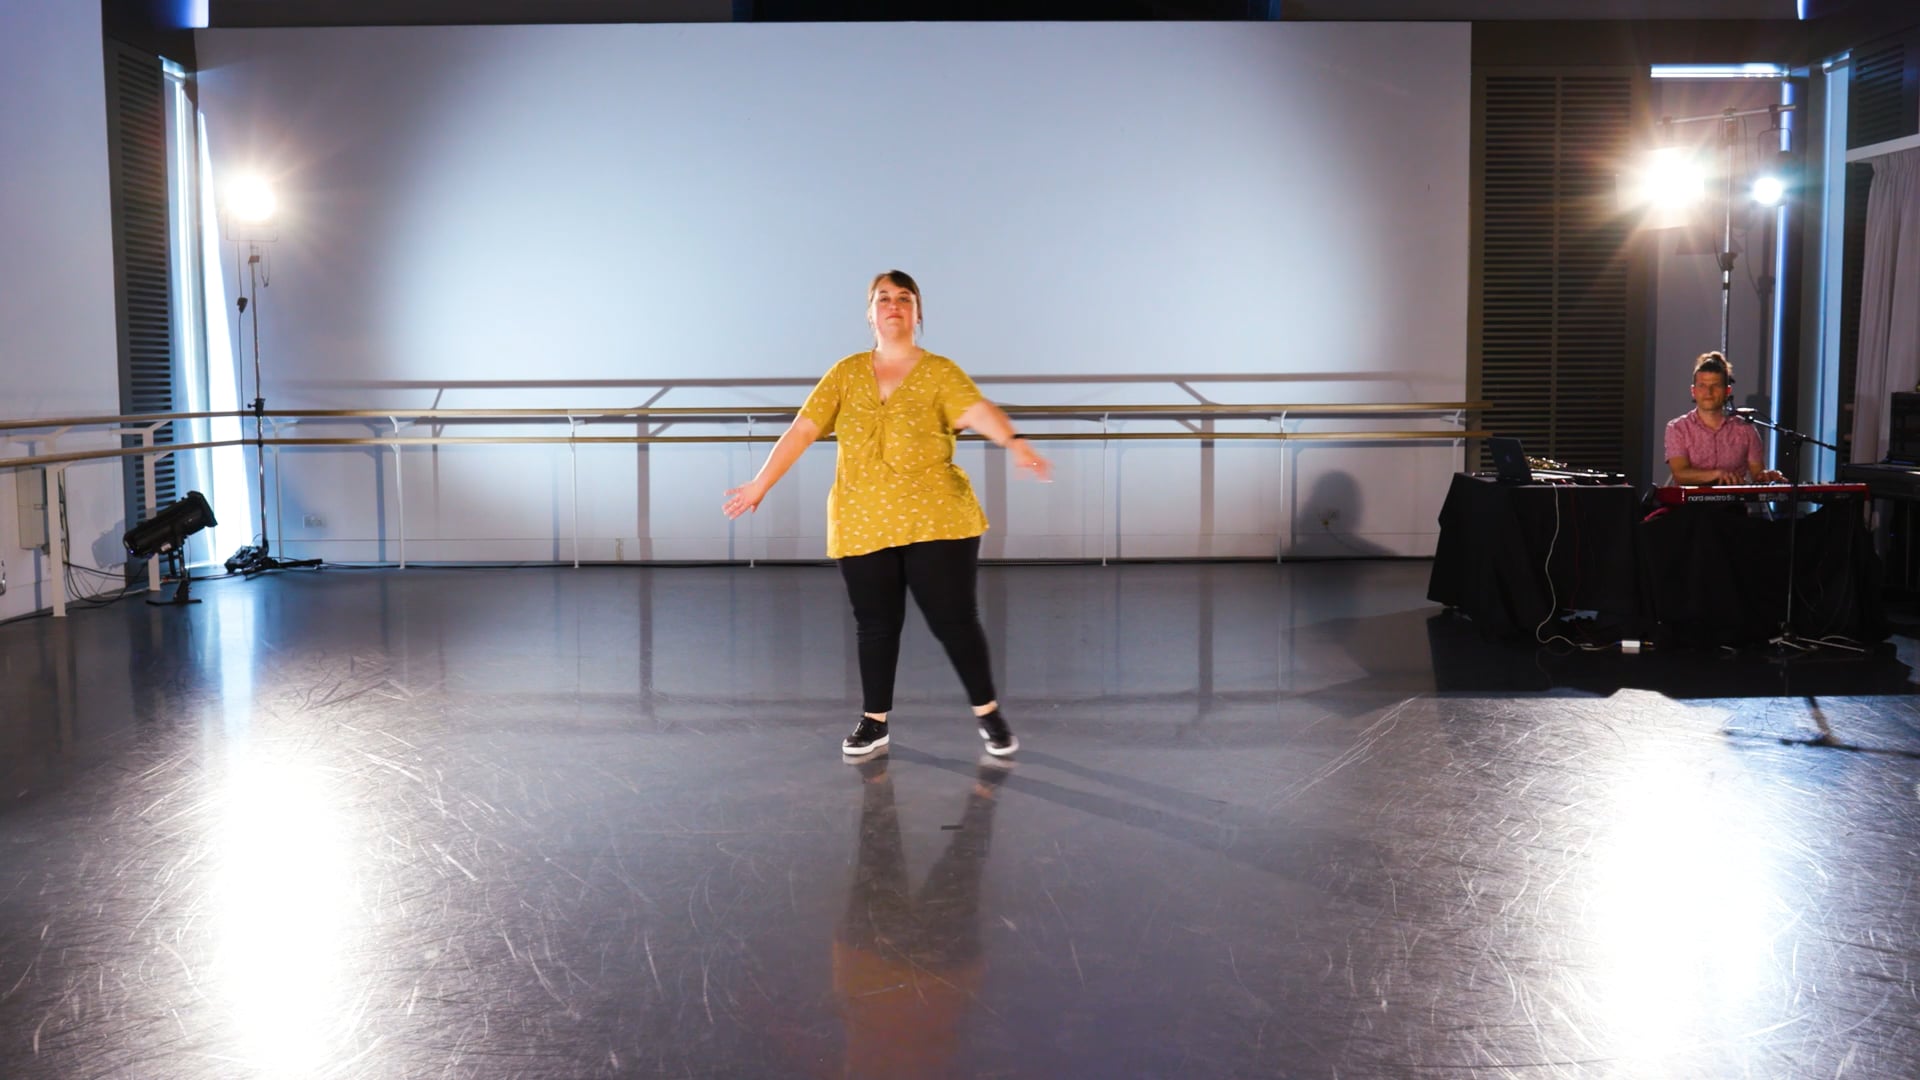 a woman in a yellow shirt is dancing on a stage.